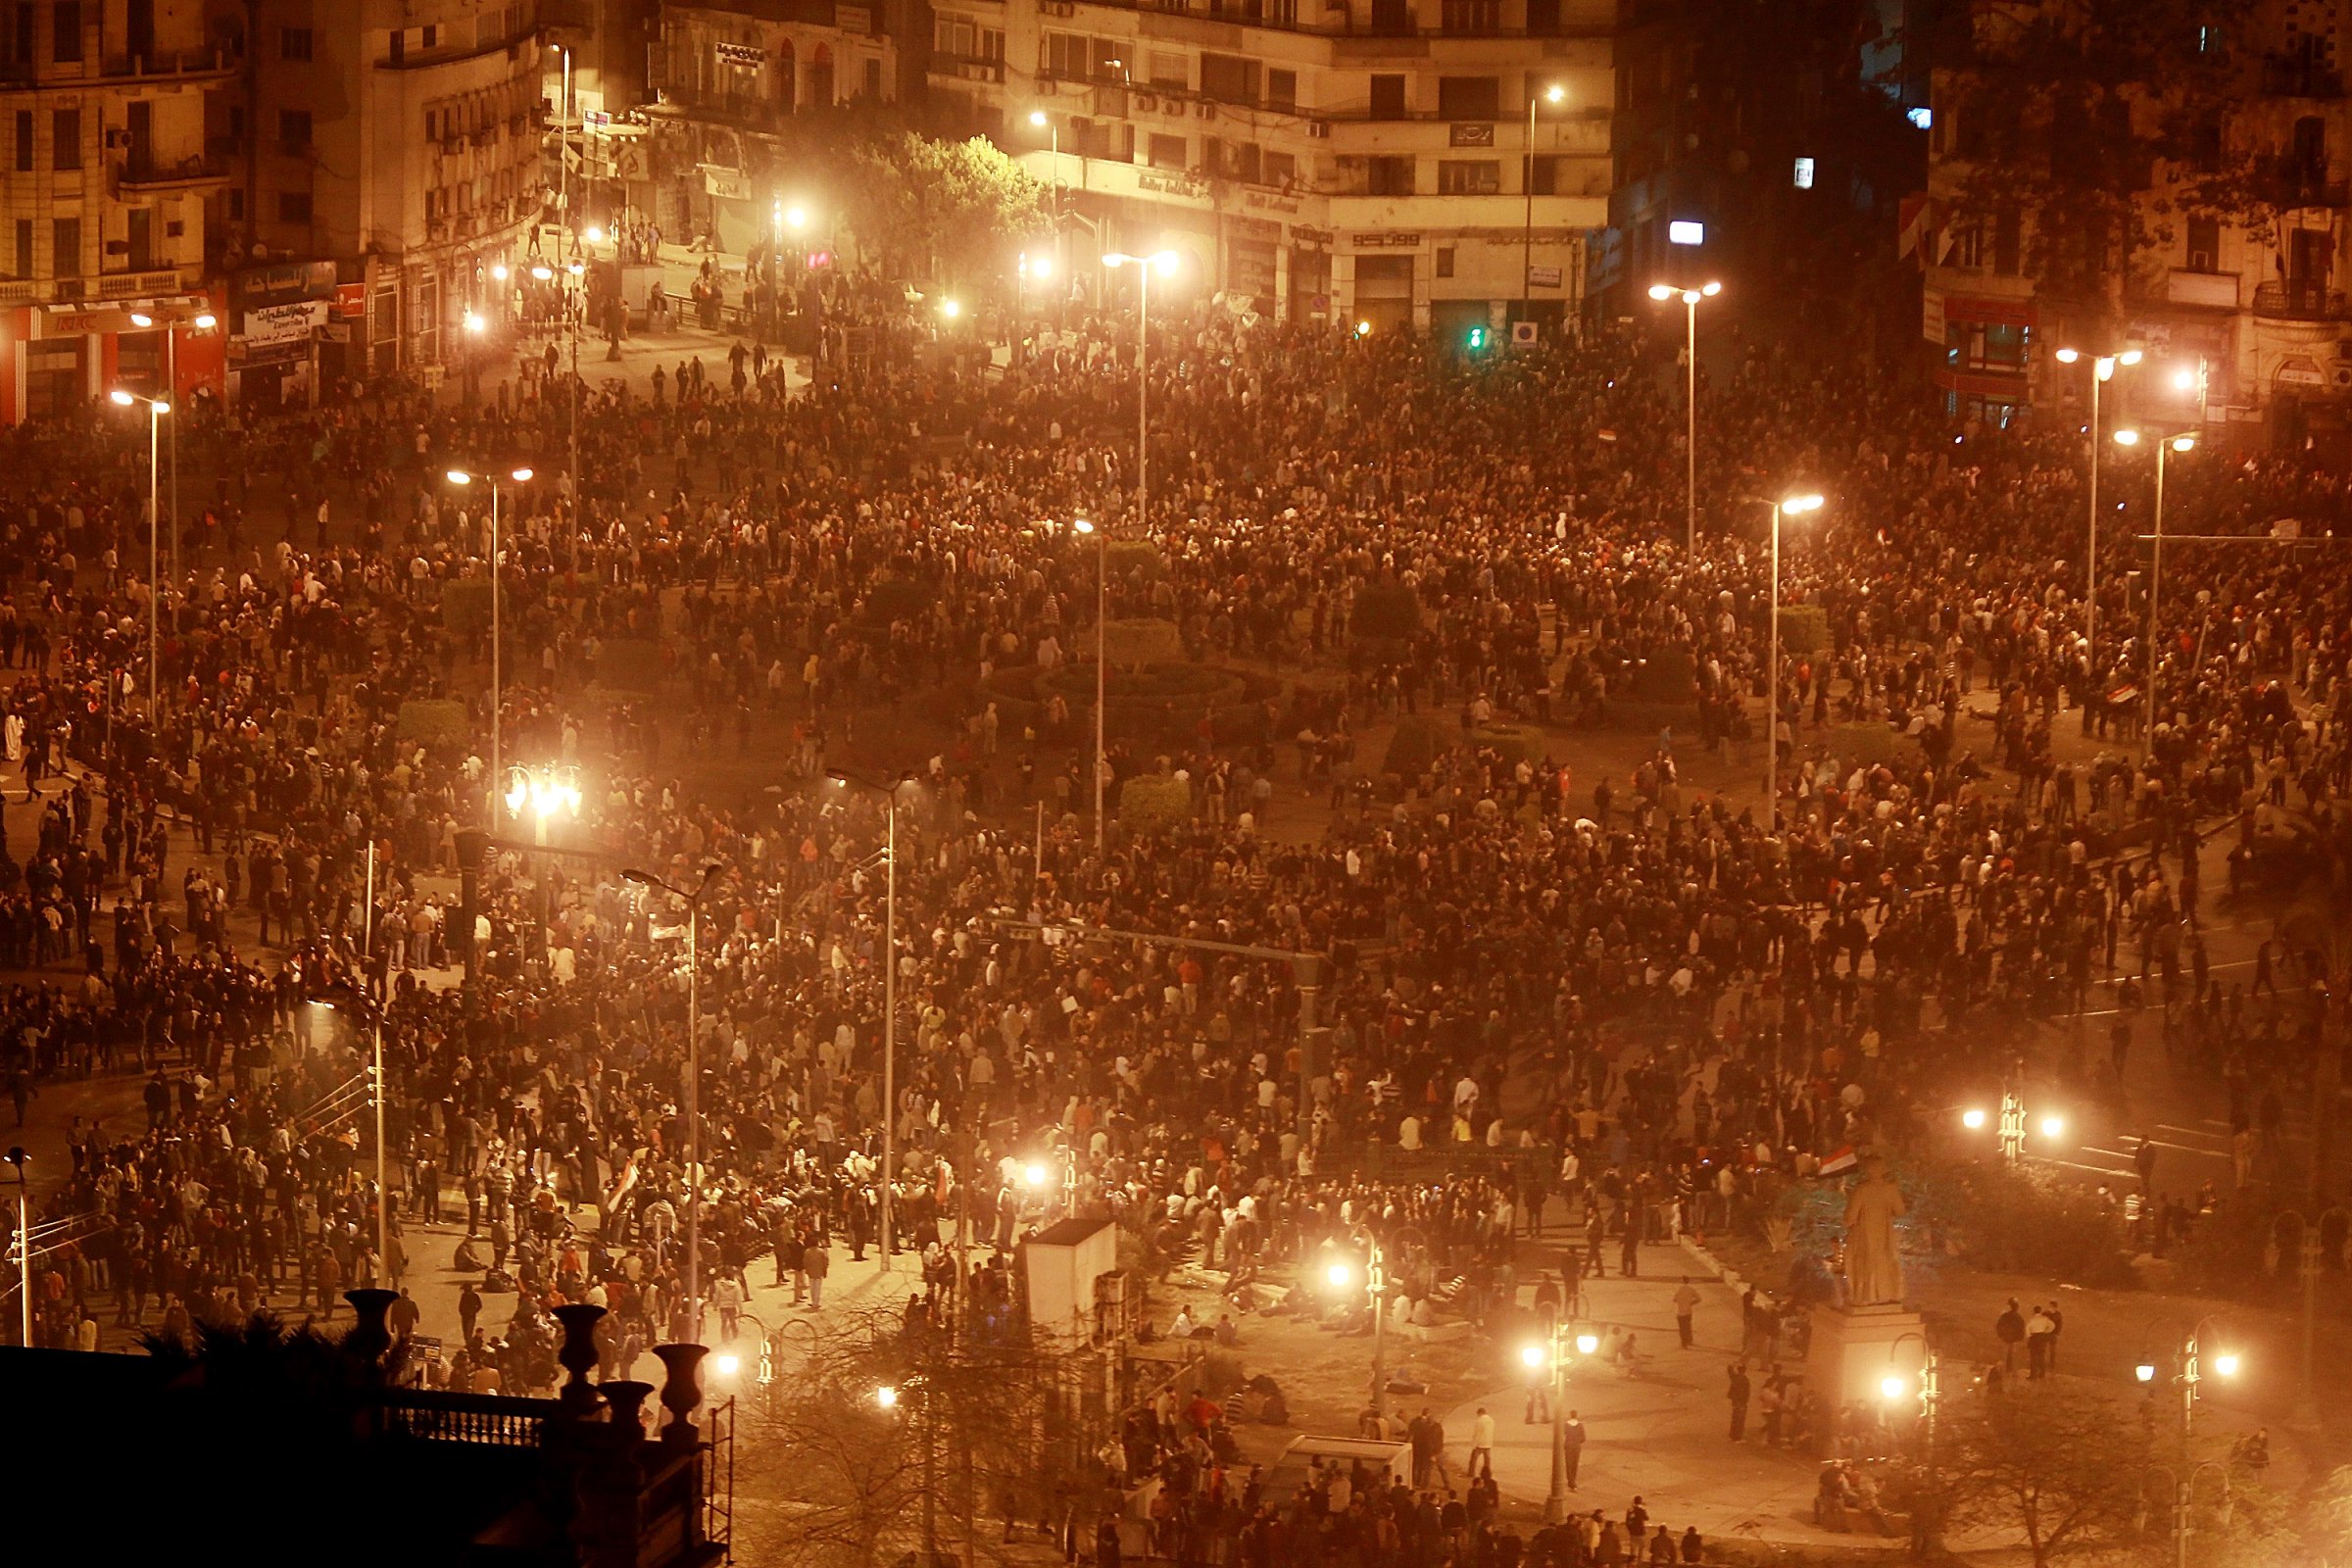 Thousands of protestors gathered in Tahrir Square on Jan. 28, 2011 in Cairo, Egypt. Thousands of police were on the streets of the capital and hundreds of arrests were made in an attempt to quell demonstrations.